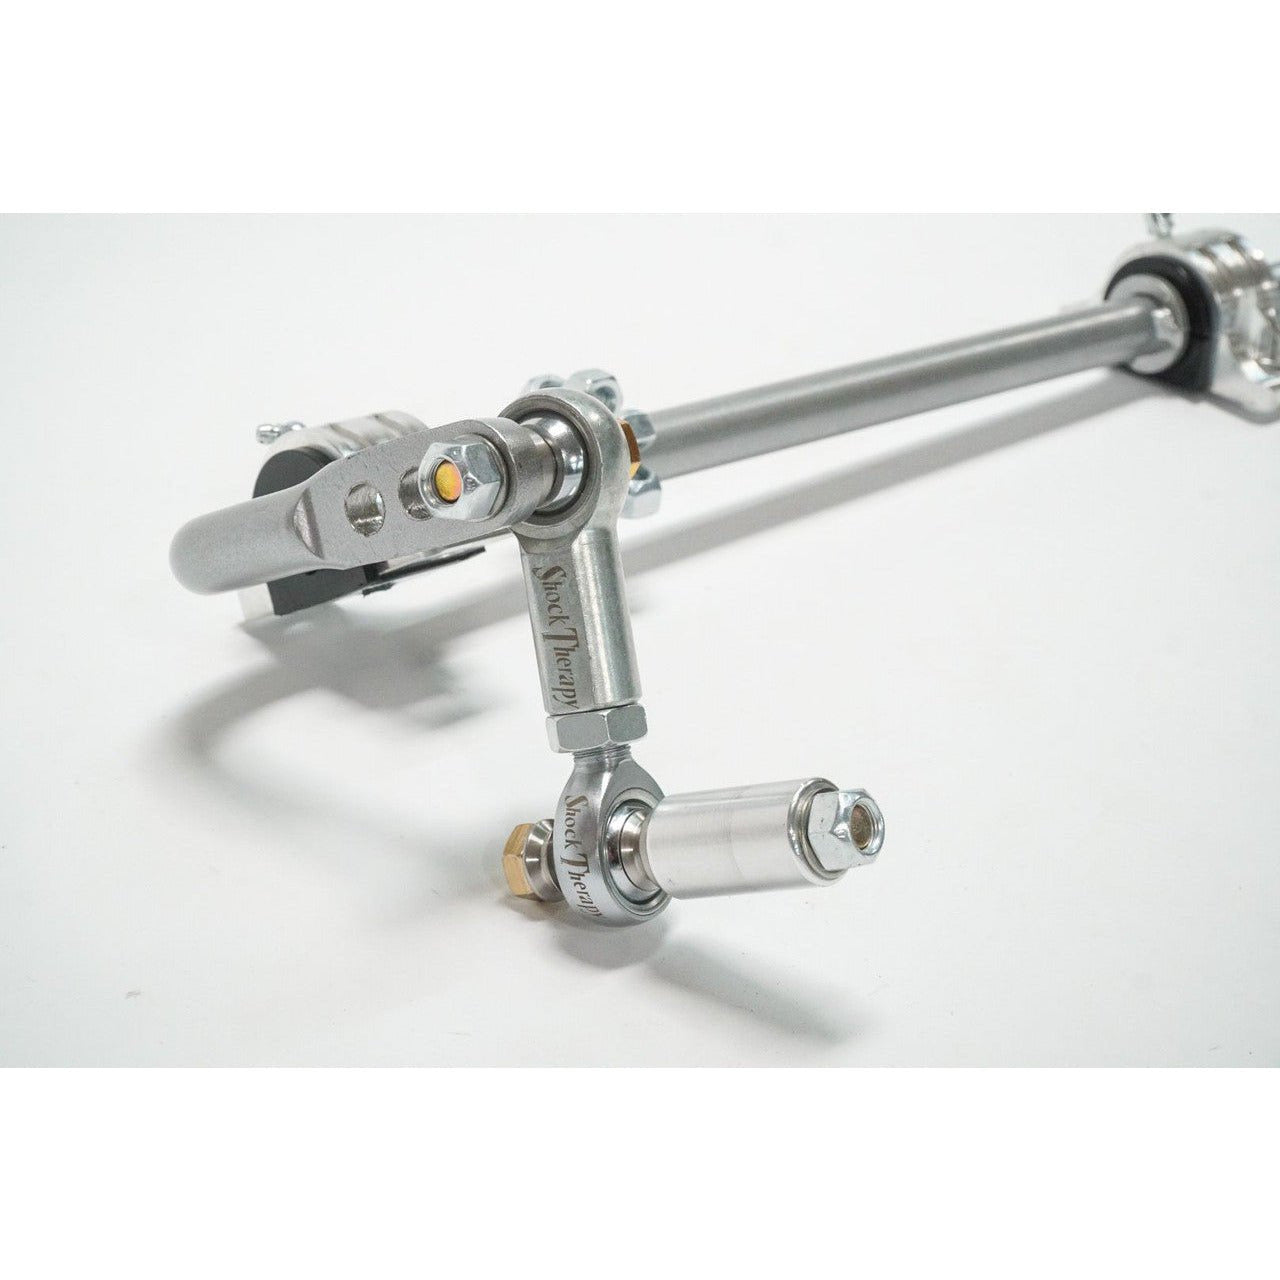 Can Am X3 72" Adjustable Front Sway Bar Links